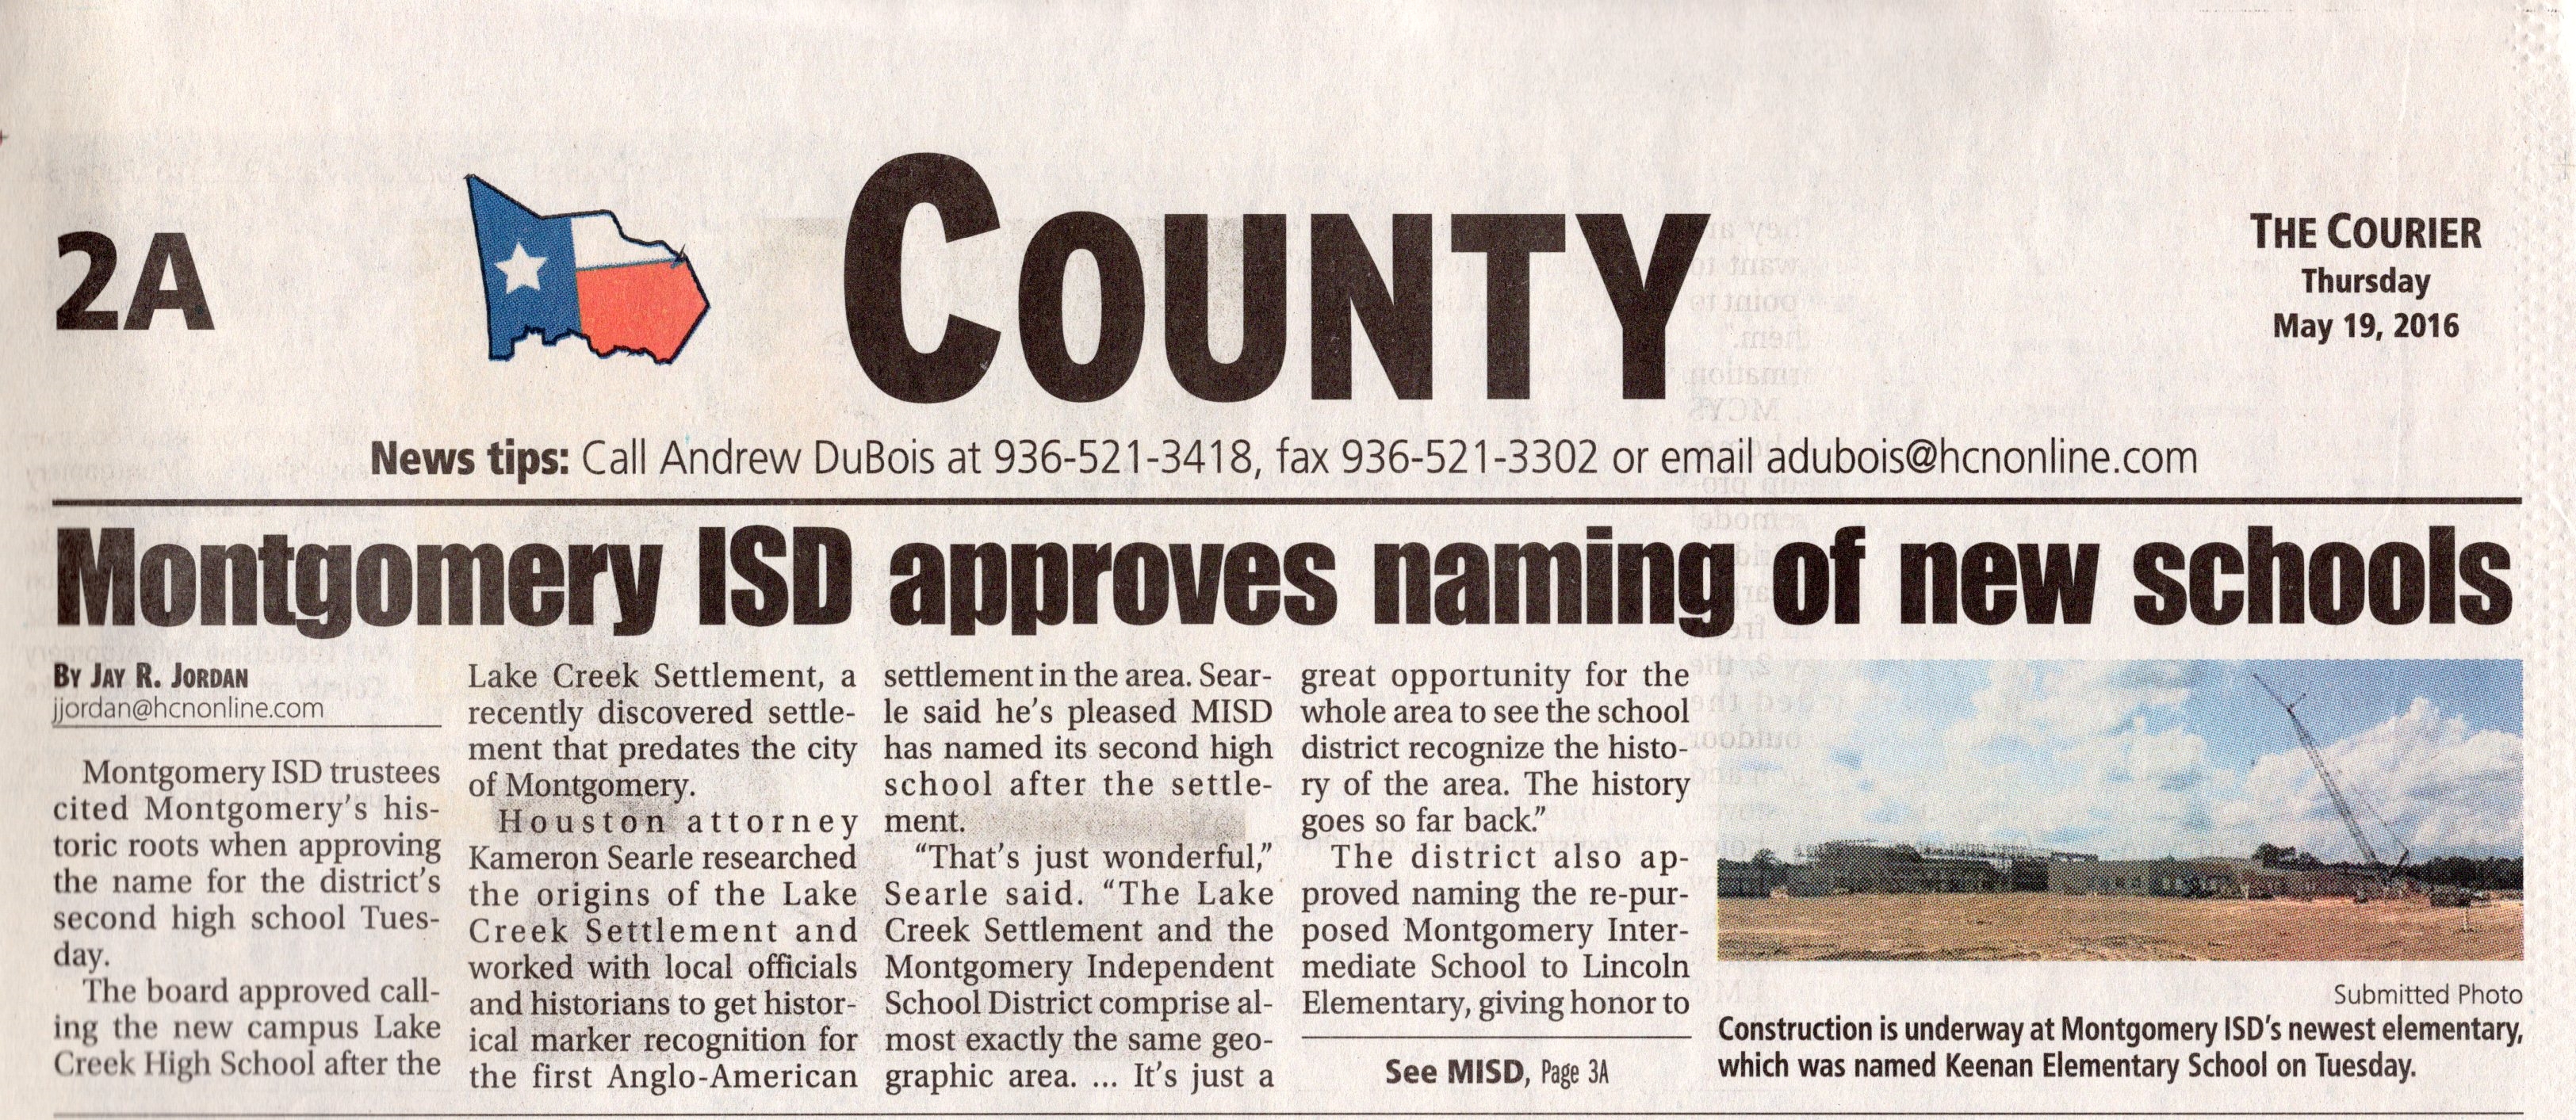 Lake Creek High School Named after Lake Creek Settlement - May 19,2016 Edition of The Courier